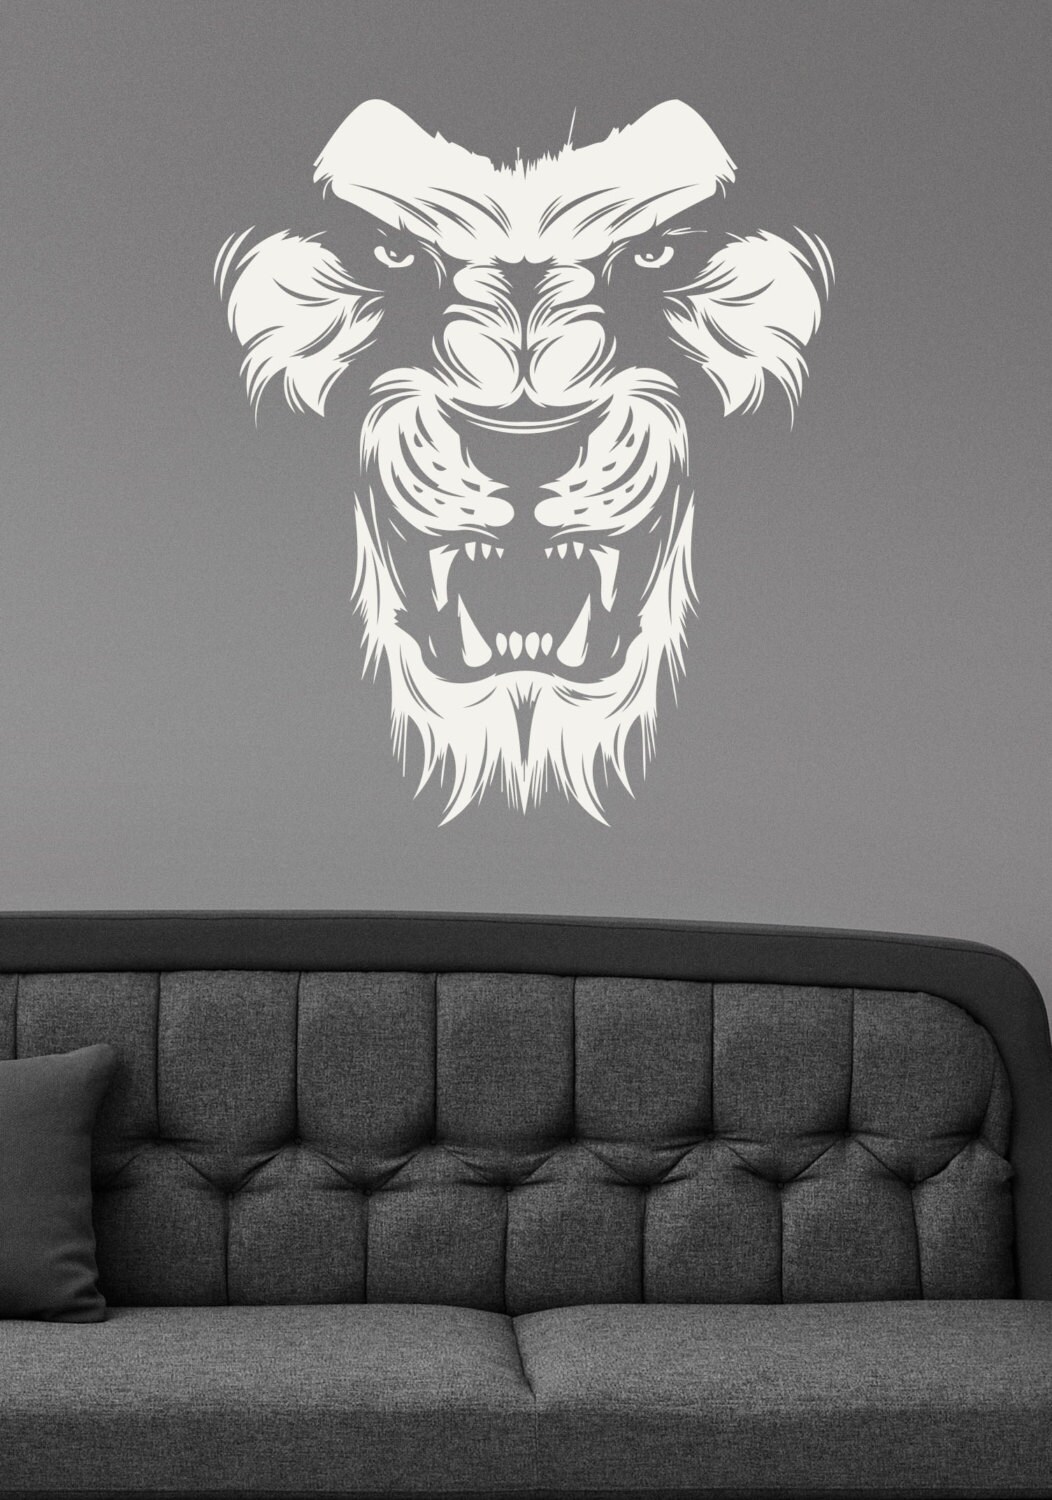 House Lannister Game Of Thrones Wall Decal Sticker Bedroom Vinyl Decor Lion 